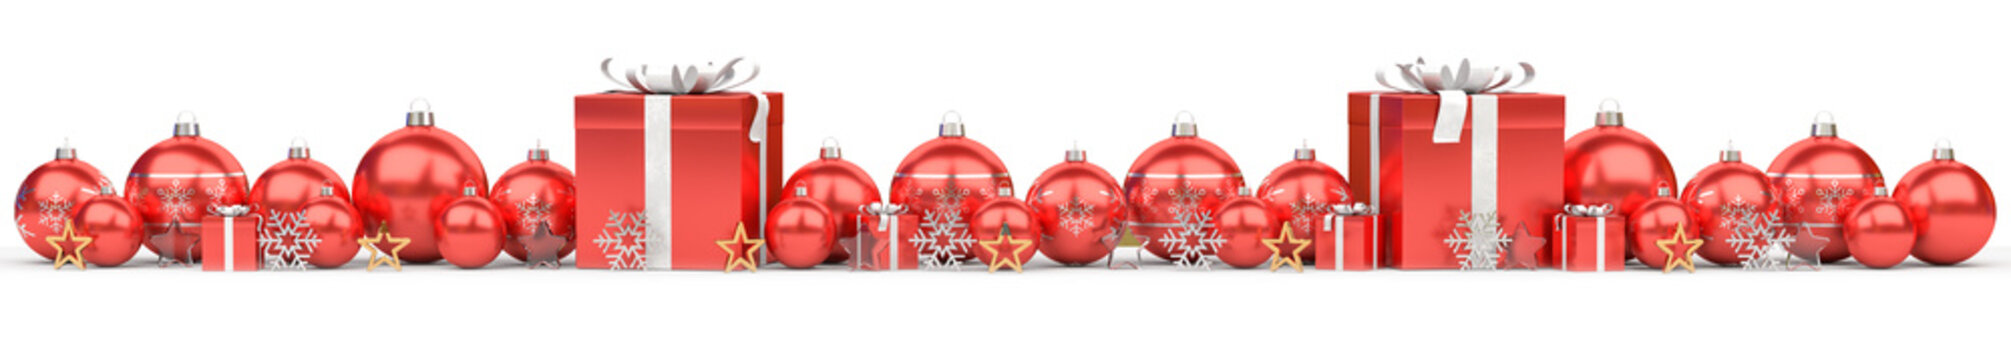 Isolated glossy christmas decoration lined up on white. 3D rendering red shiny baubles ornaments. Gifts with bows and glossy golden stars. Merry Xmas cut out background